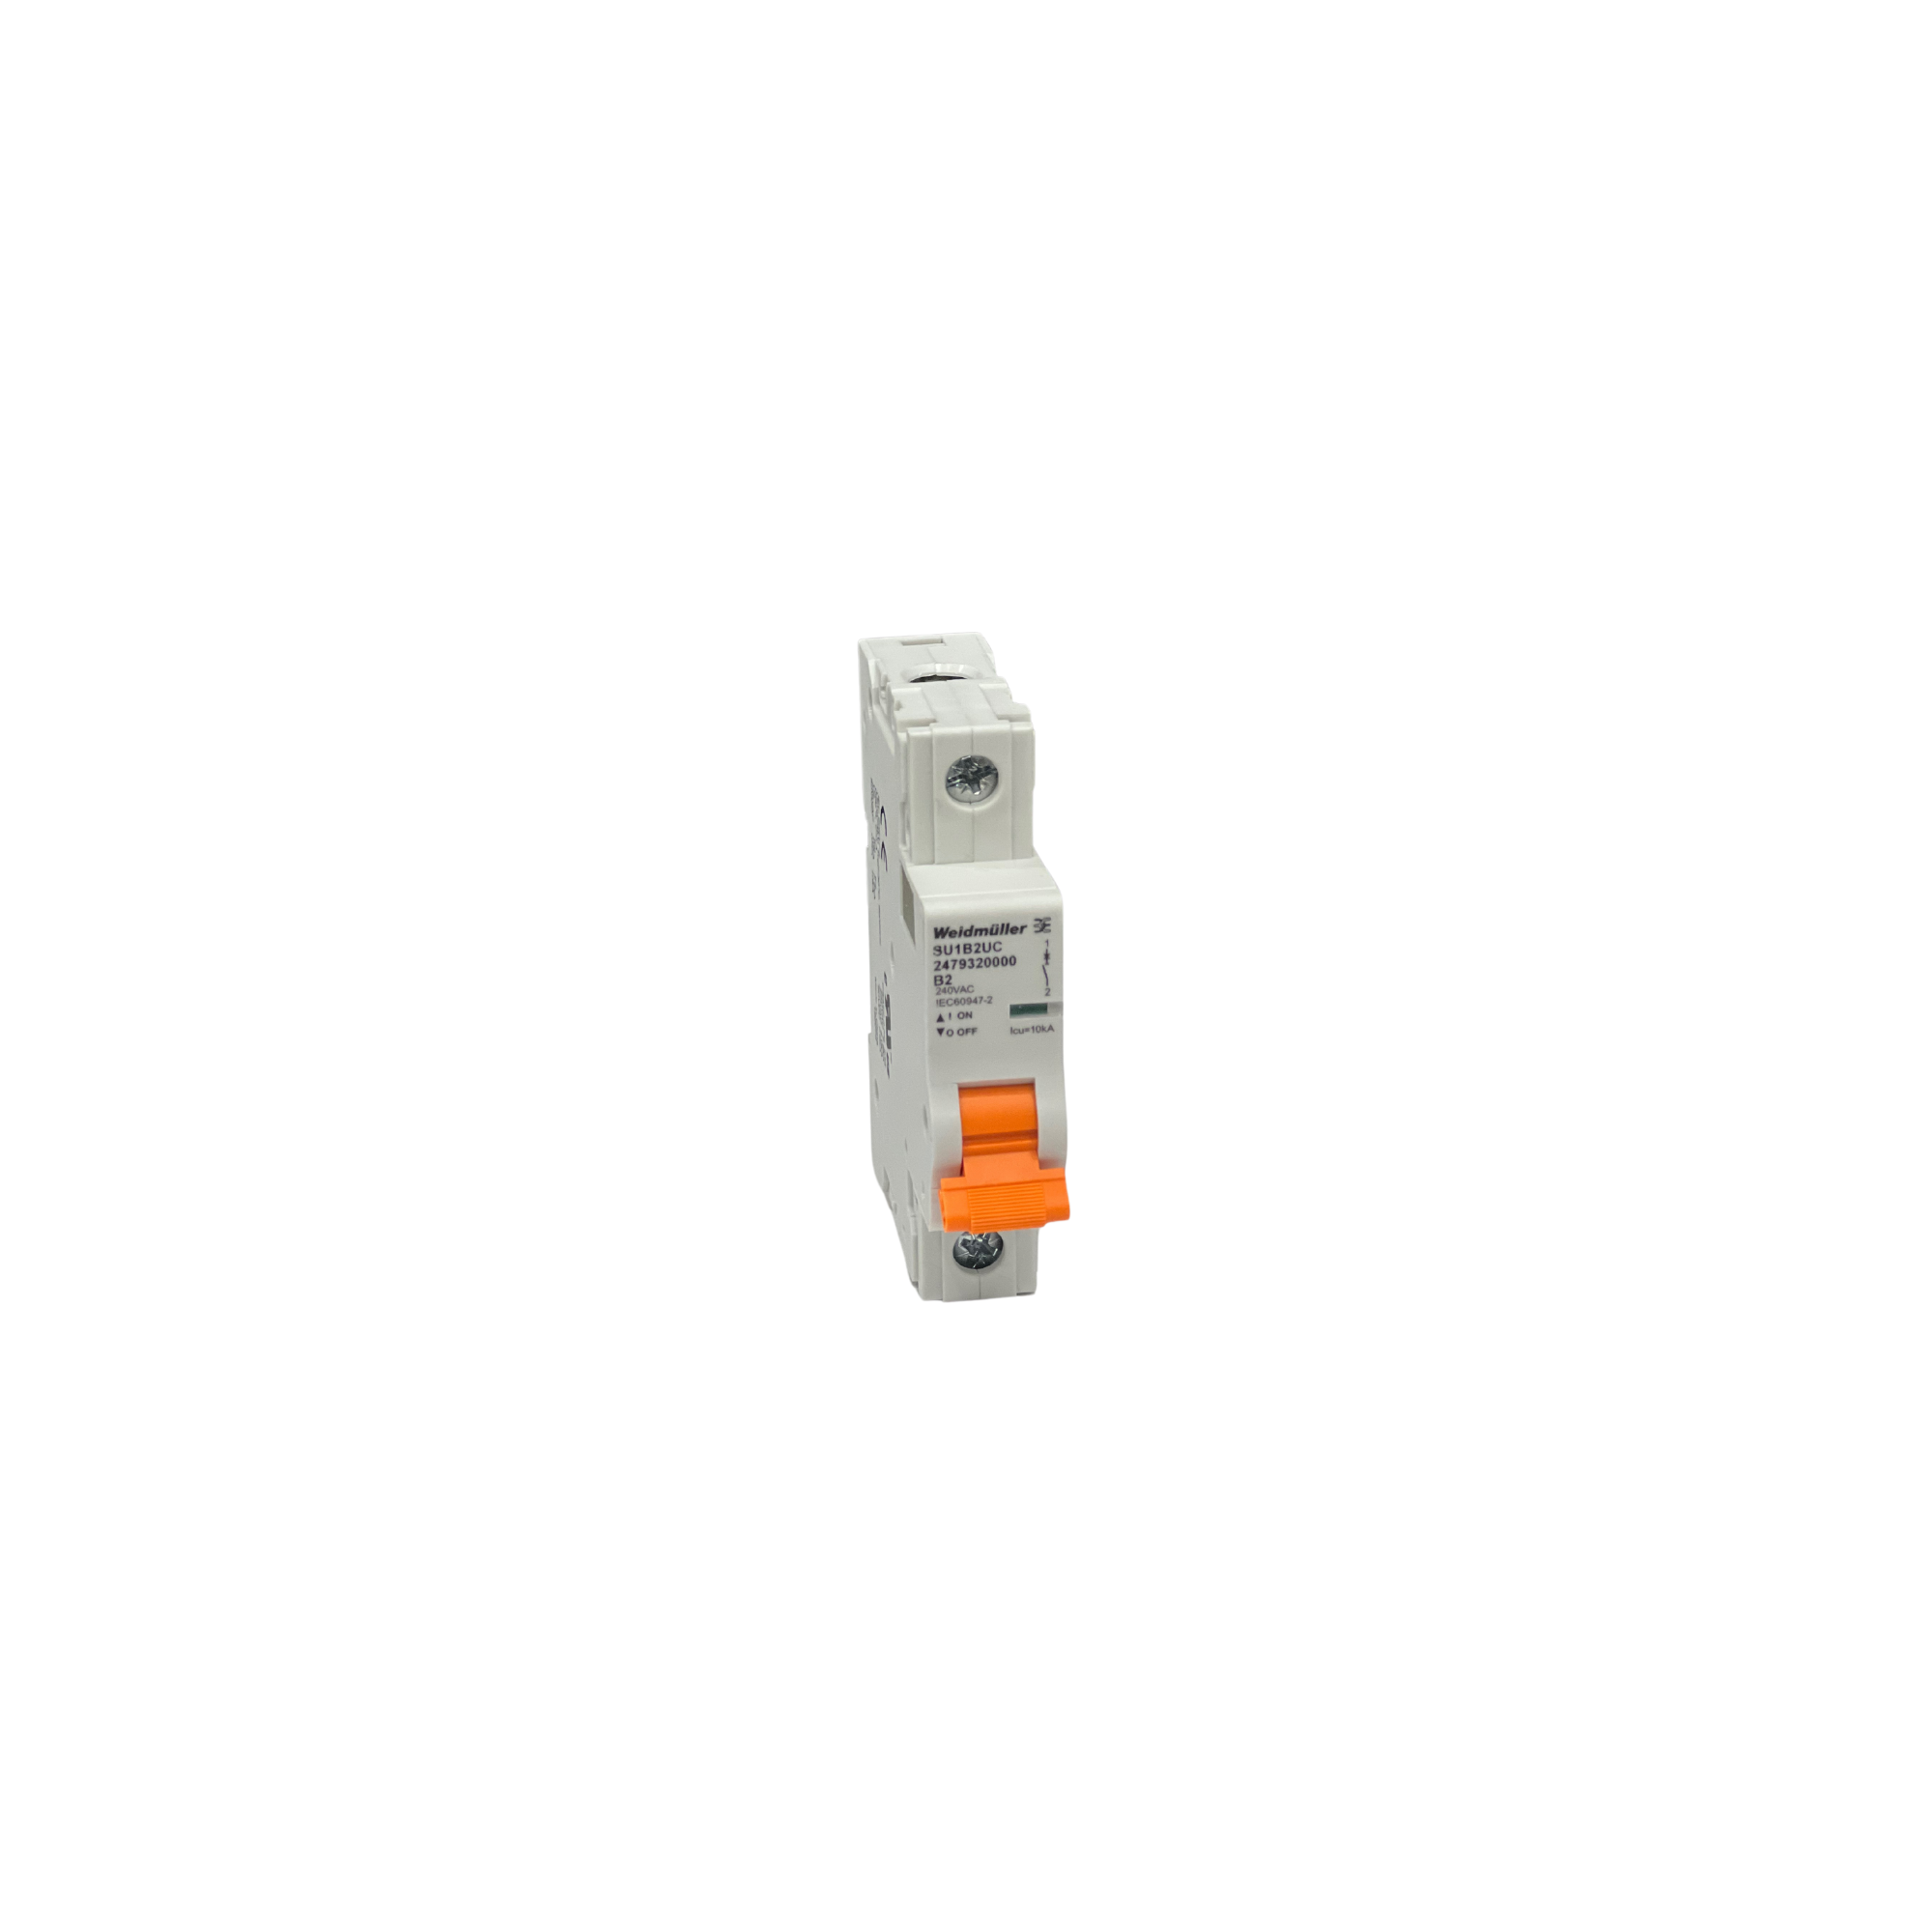 circuit breaker with orange switch and two screws on each side for mounting